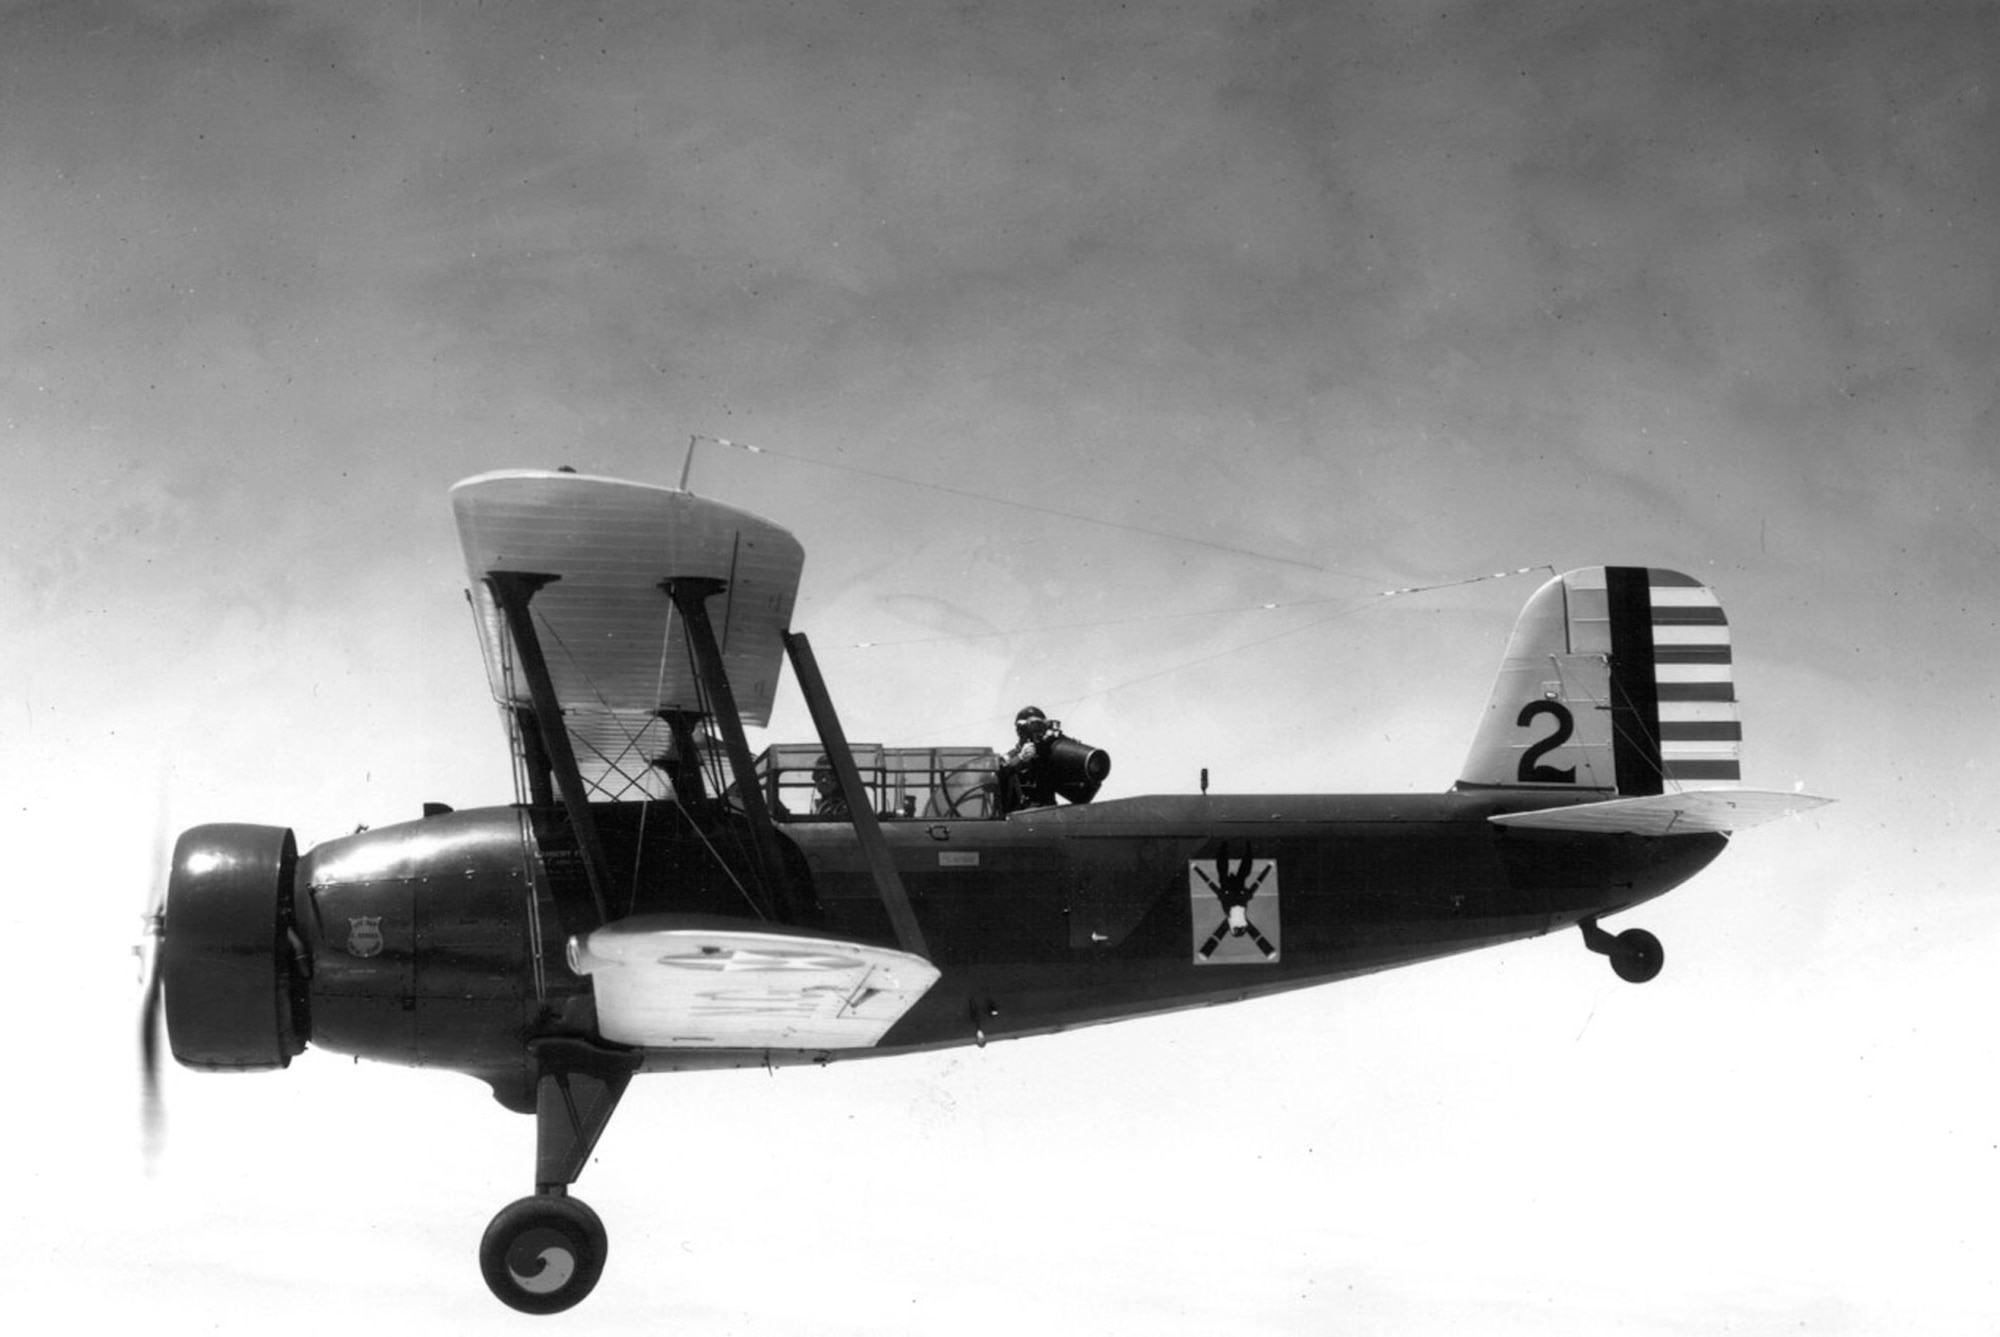 Members of the 110th Observation Squadron, Missouri National Guard, fly a Douglas O-38E observation plan with pilot and photographer onboard, circa 1936.  The photographer is using a K-17 Observation camera.  (131st Bomb Wing file photo/RELEASED)